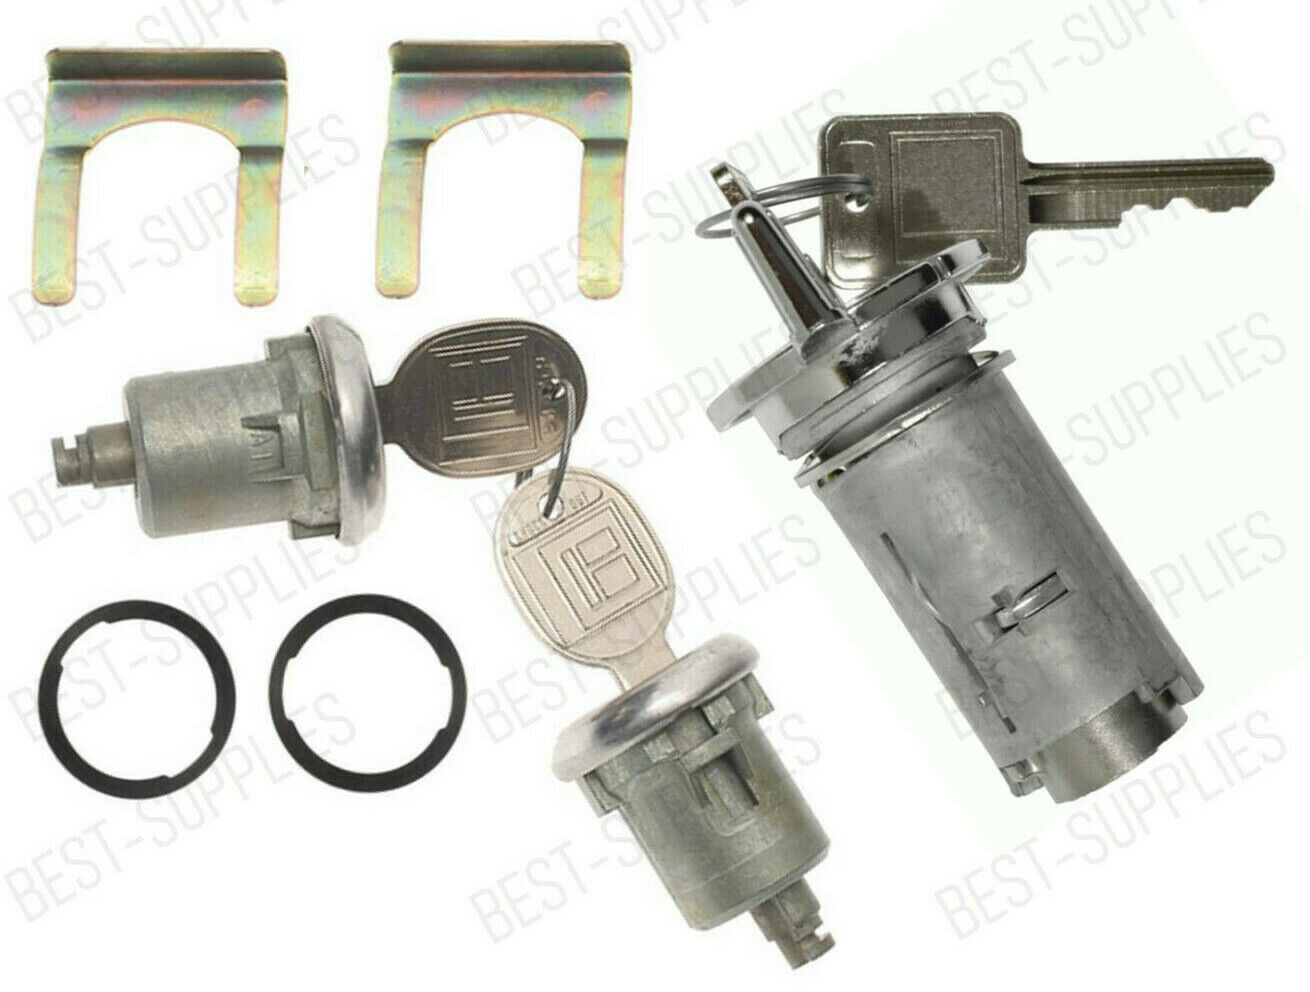 Ignition Lock Cylinder & Door Lock Pair Set W/ Keys for listed Chevy vehicles